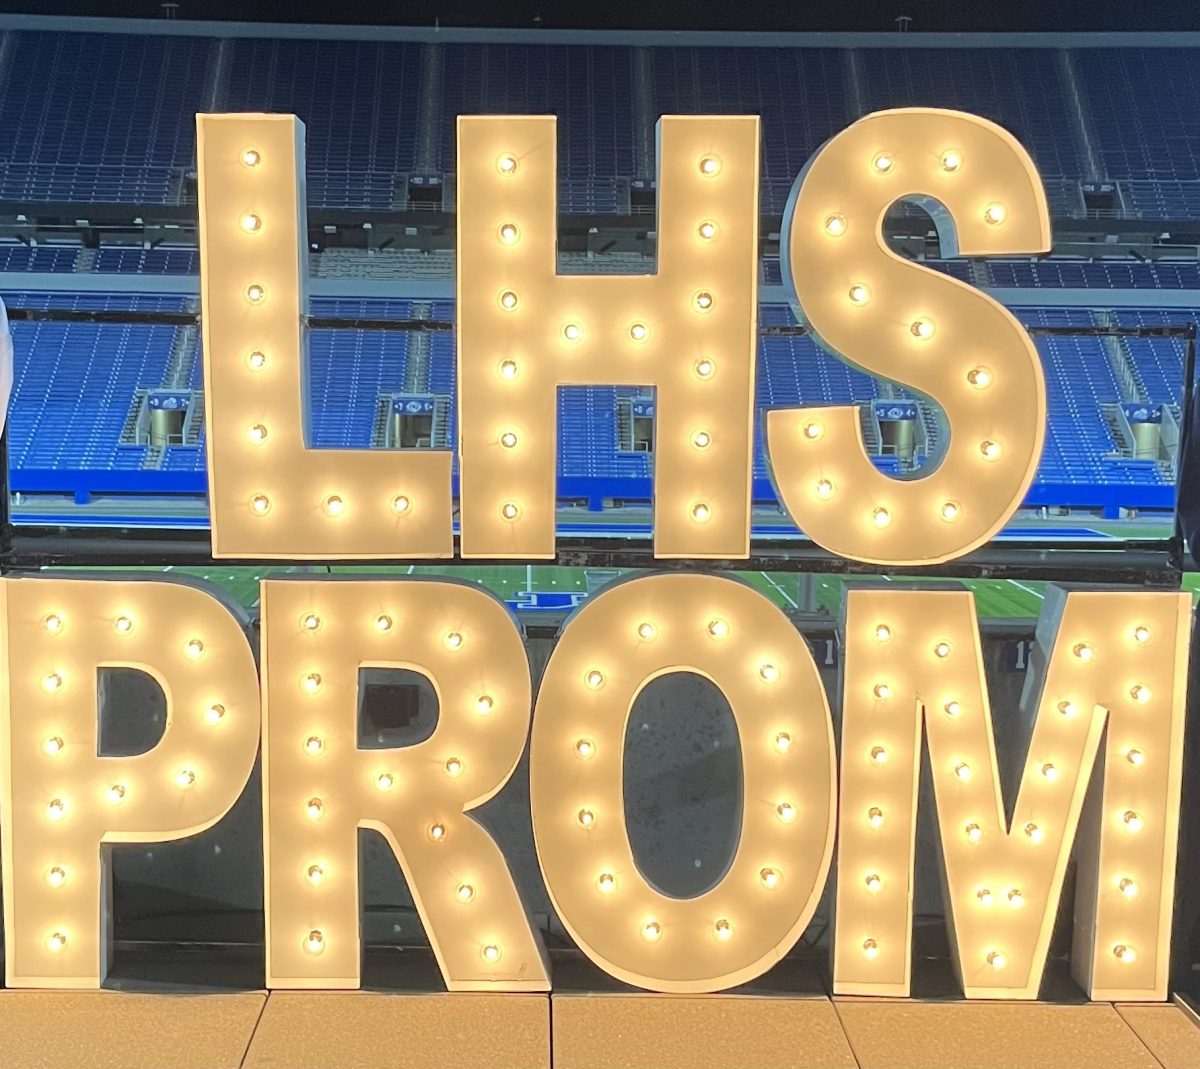 The+Lafayette+High+schools+sign+for+Prom+on+April+14th%2C+2022